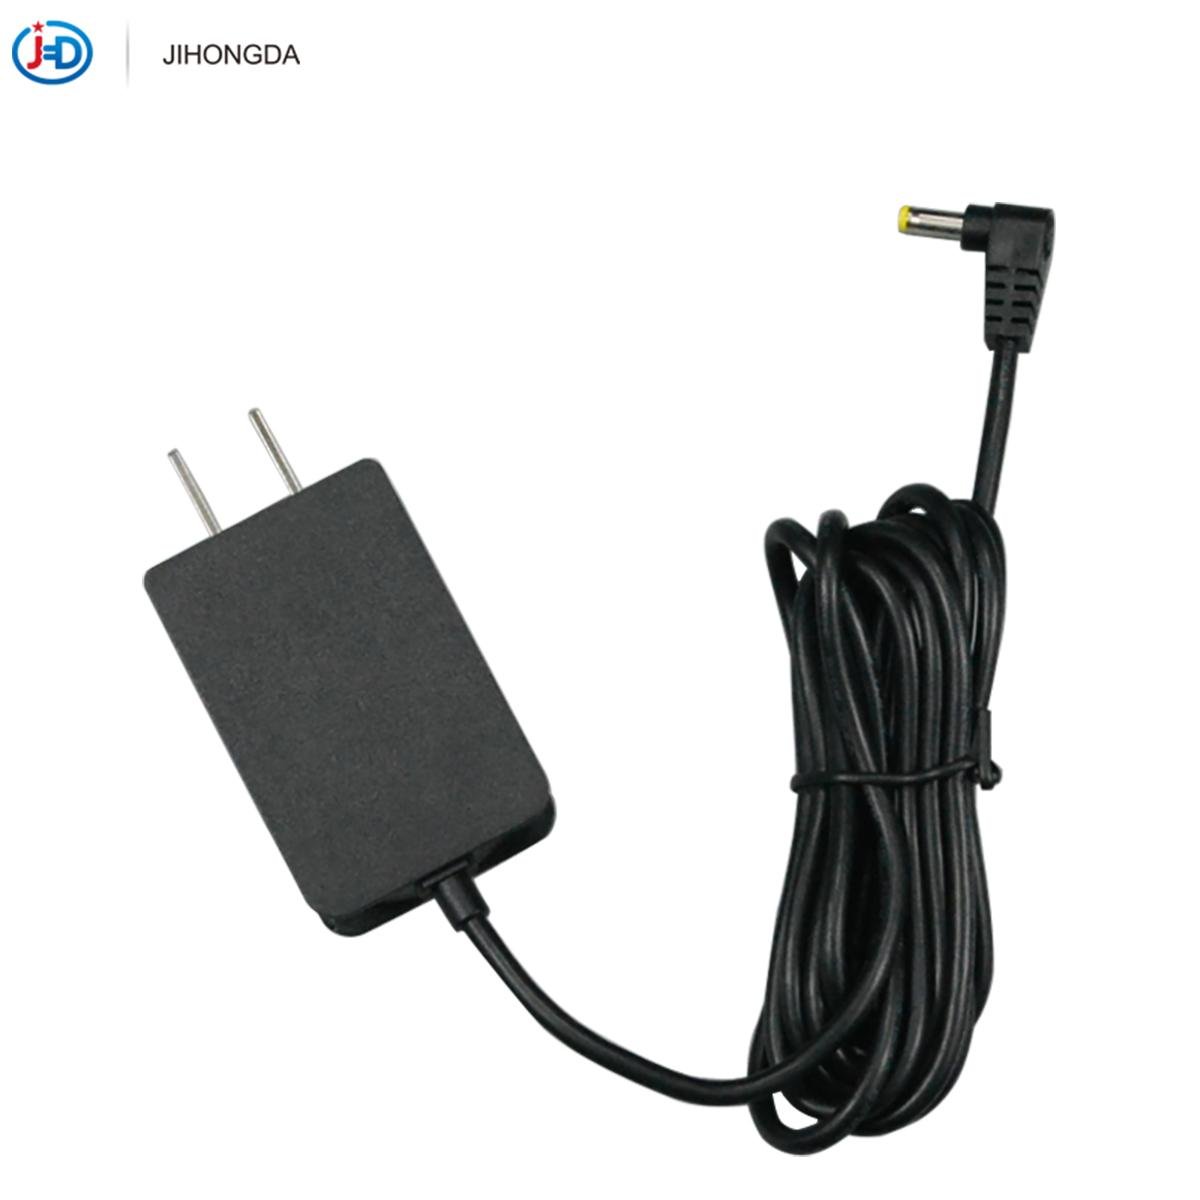 5V2A Switching Power Adapter with UL PSE FCC 2